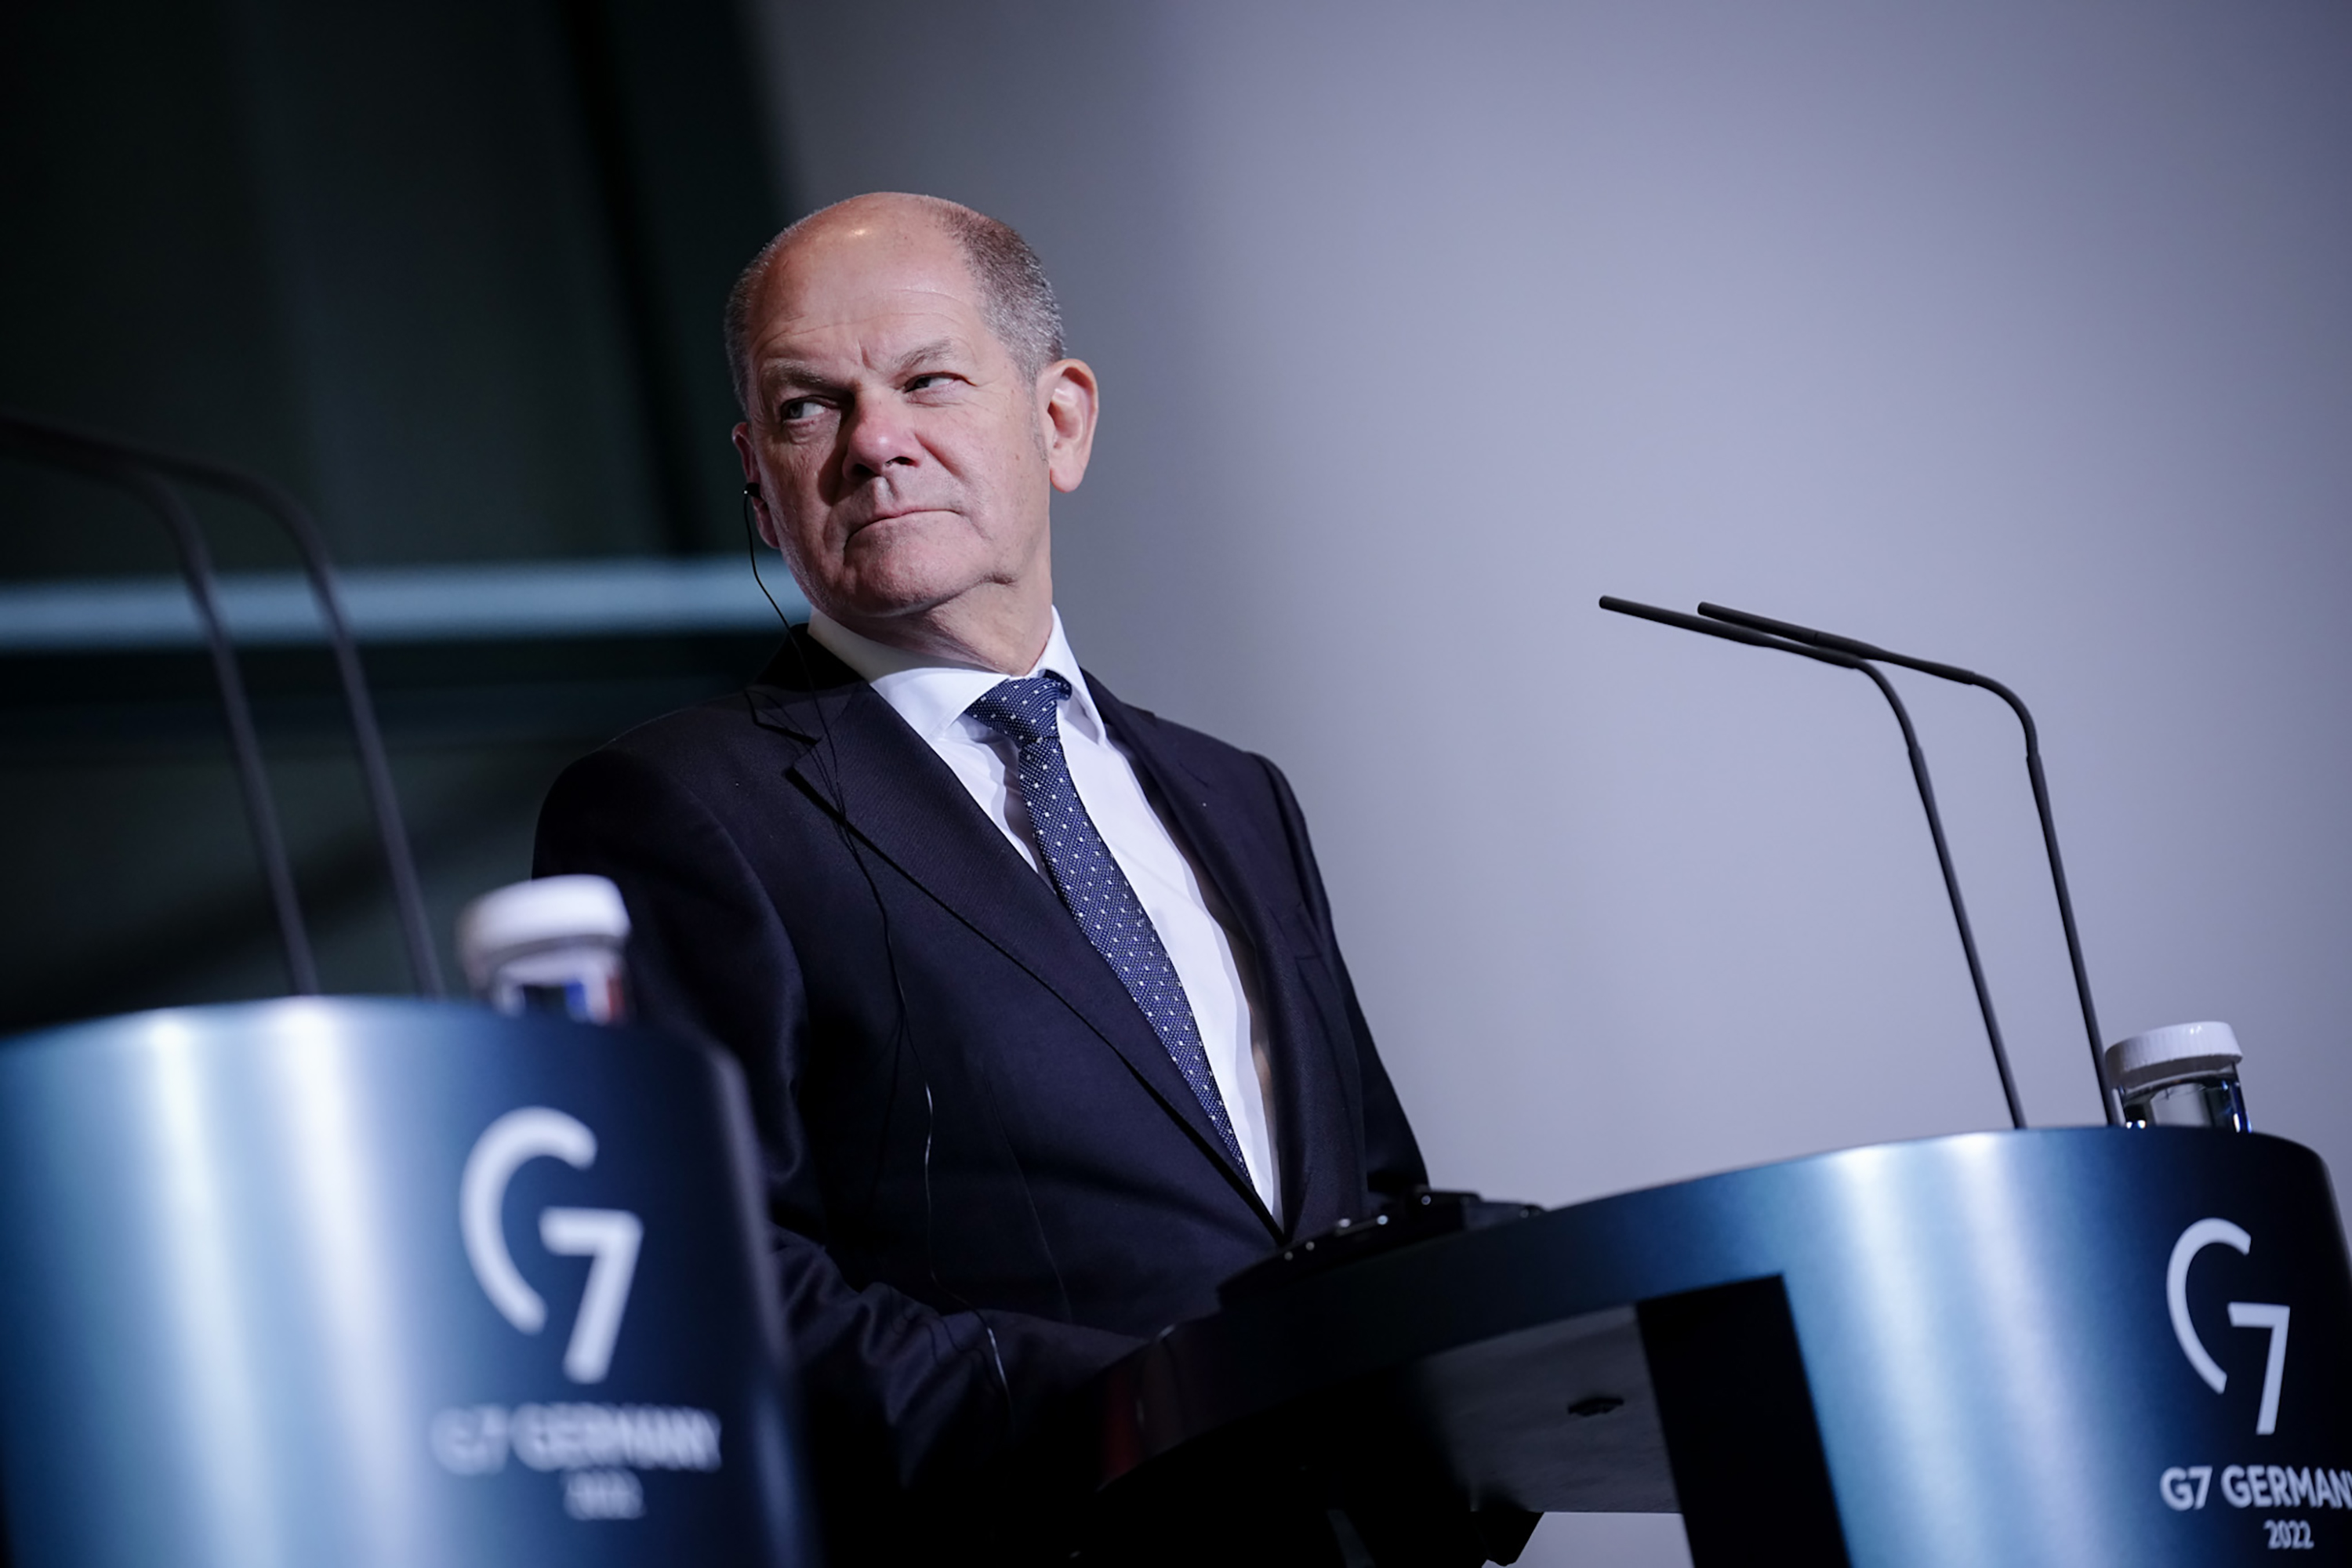 German Chancellor Olaf Scholz gives a press conference on November 23, in Berlin.